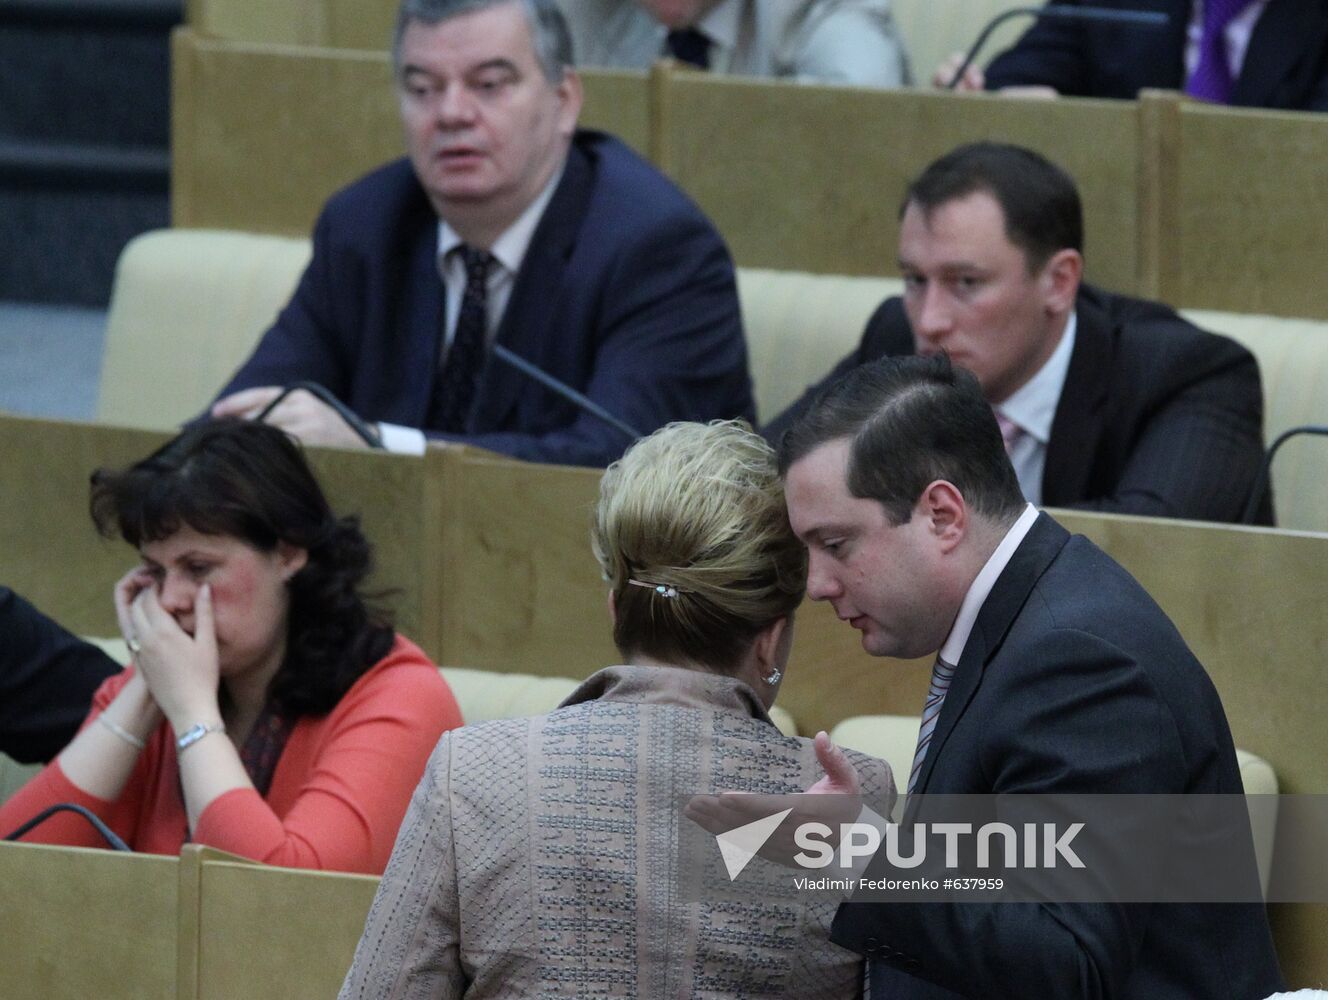 Meeting of Russian State Duma on April 27